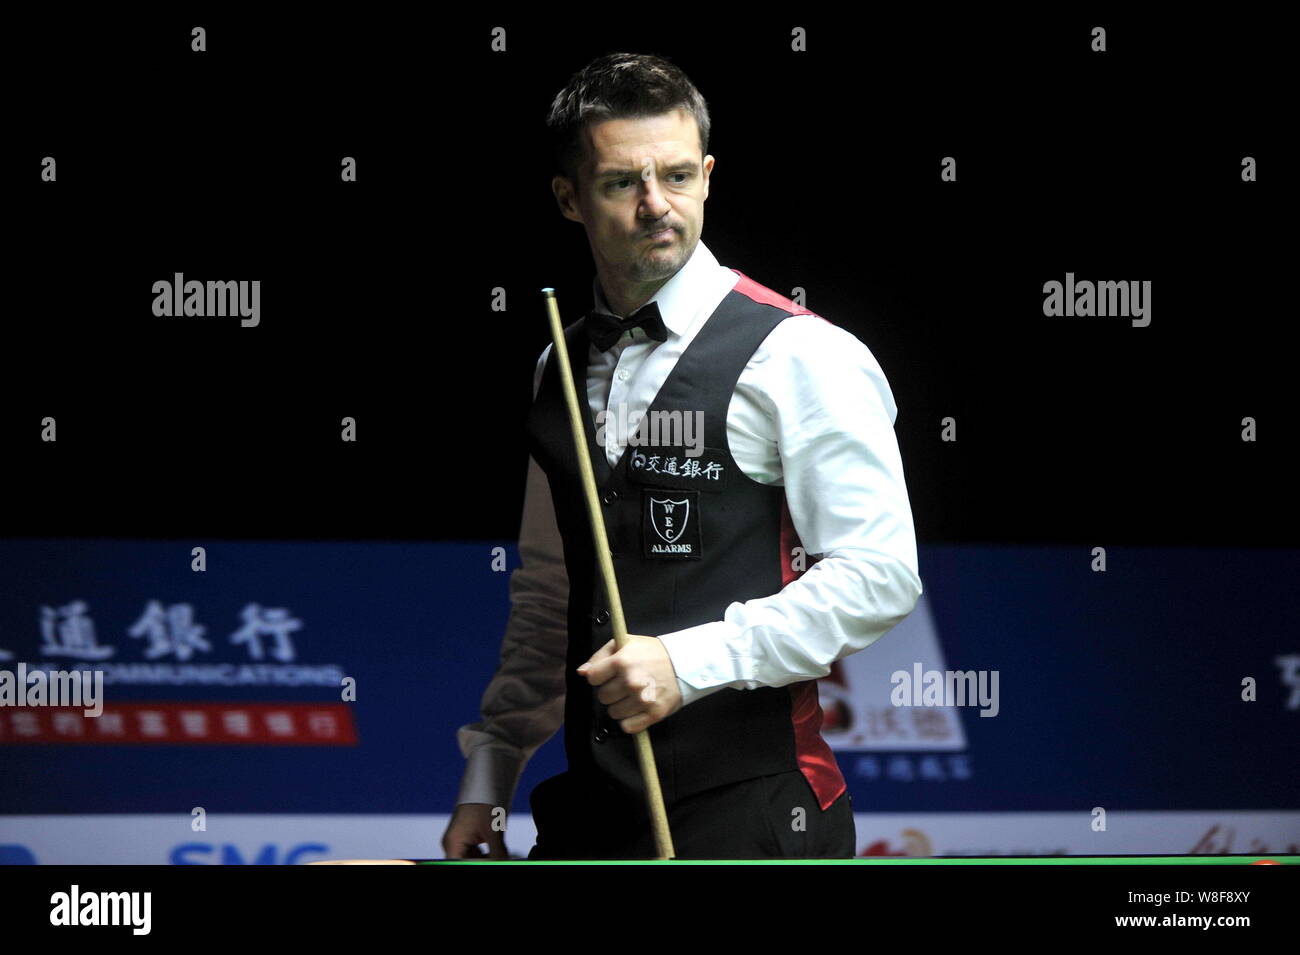 Michael Holt of England considers a shot against Stephen Maguire of England during their first round match of the 2015 World Snooker Shanghai Masters Stock Photo